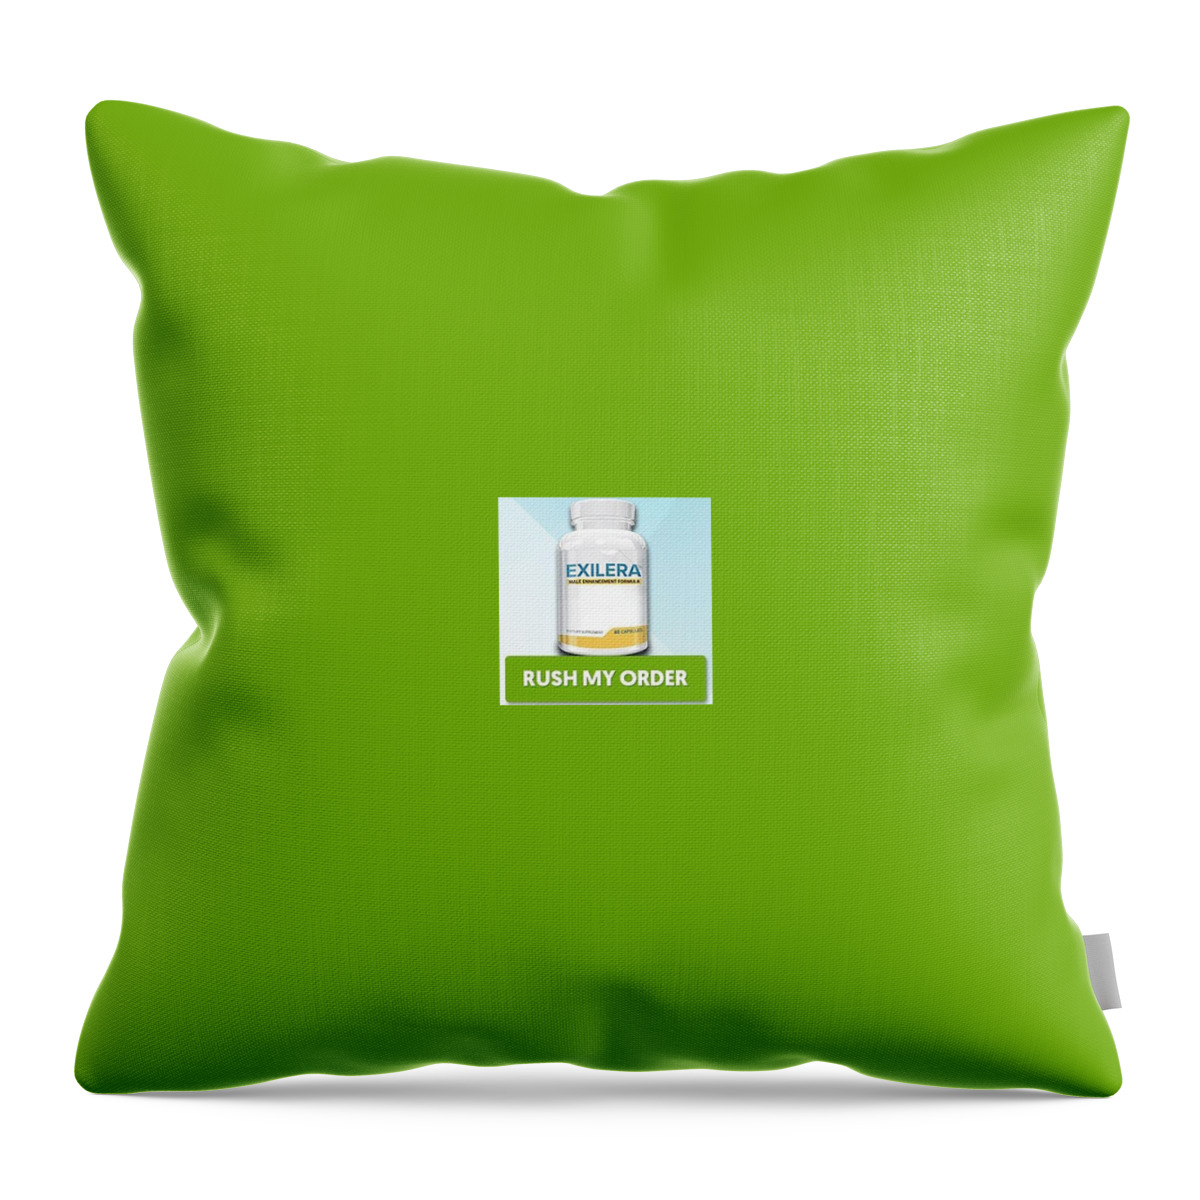 Exilera Male Enhancement Throw Pillow featuring the digital art Exilera Male Enhancement by Required Required